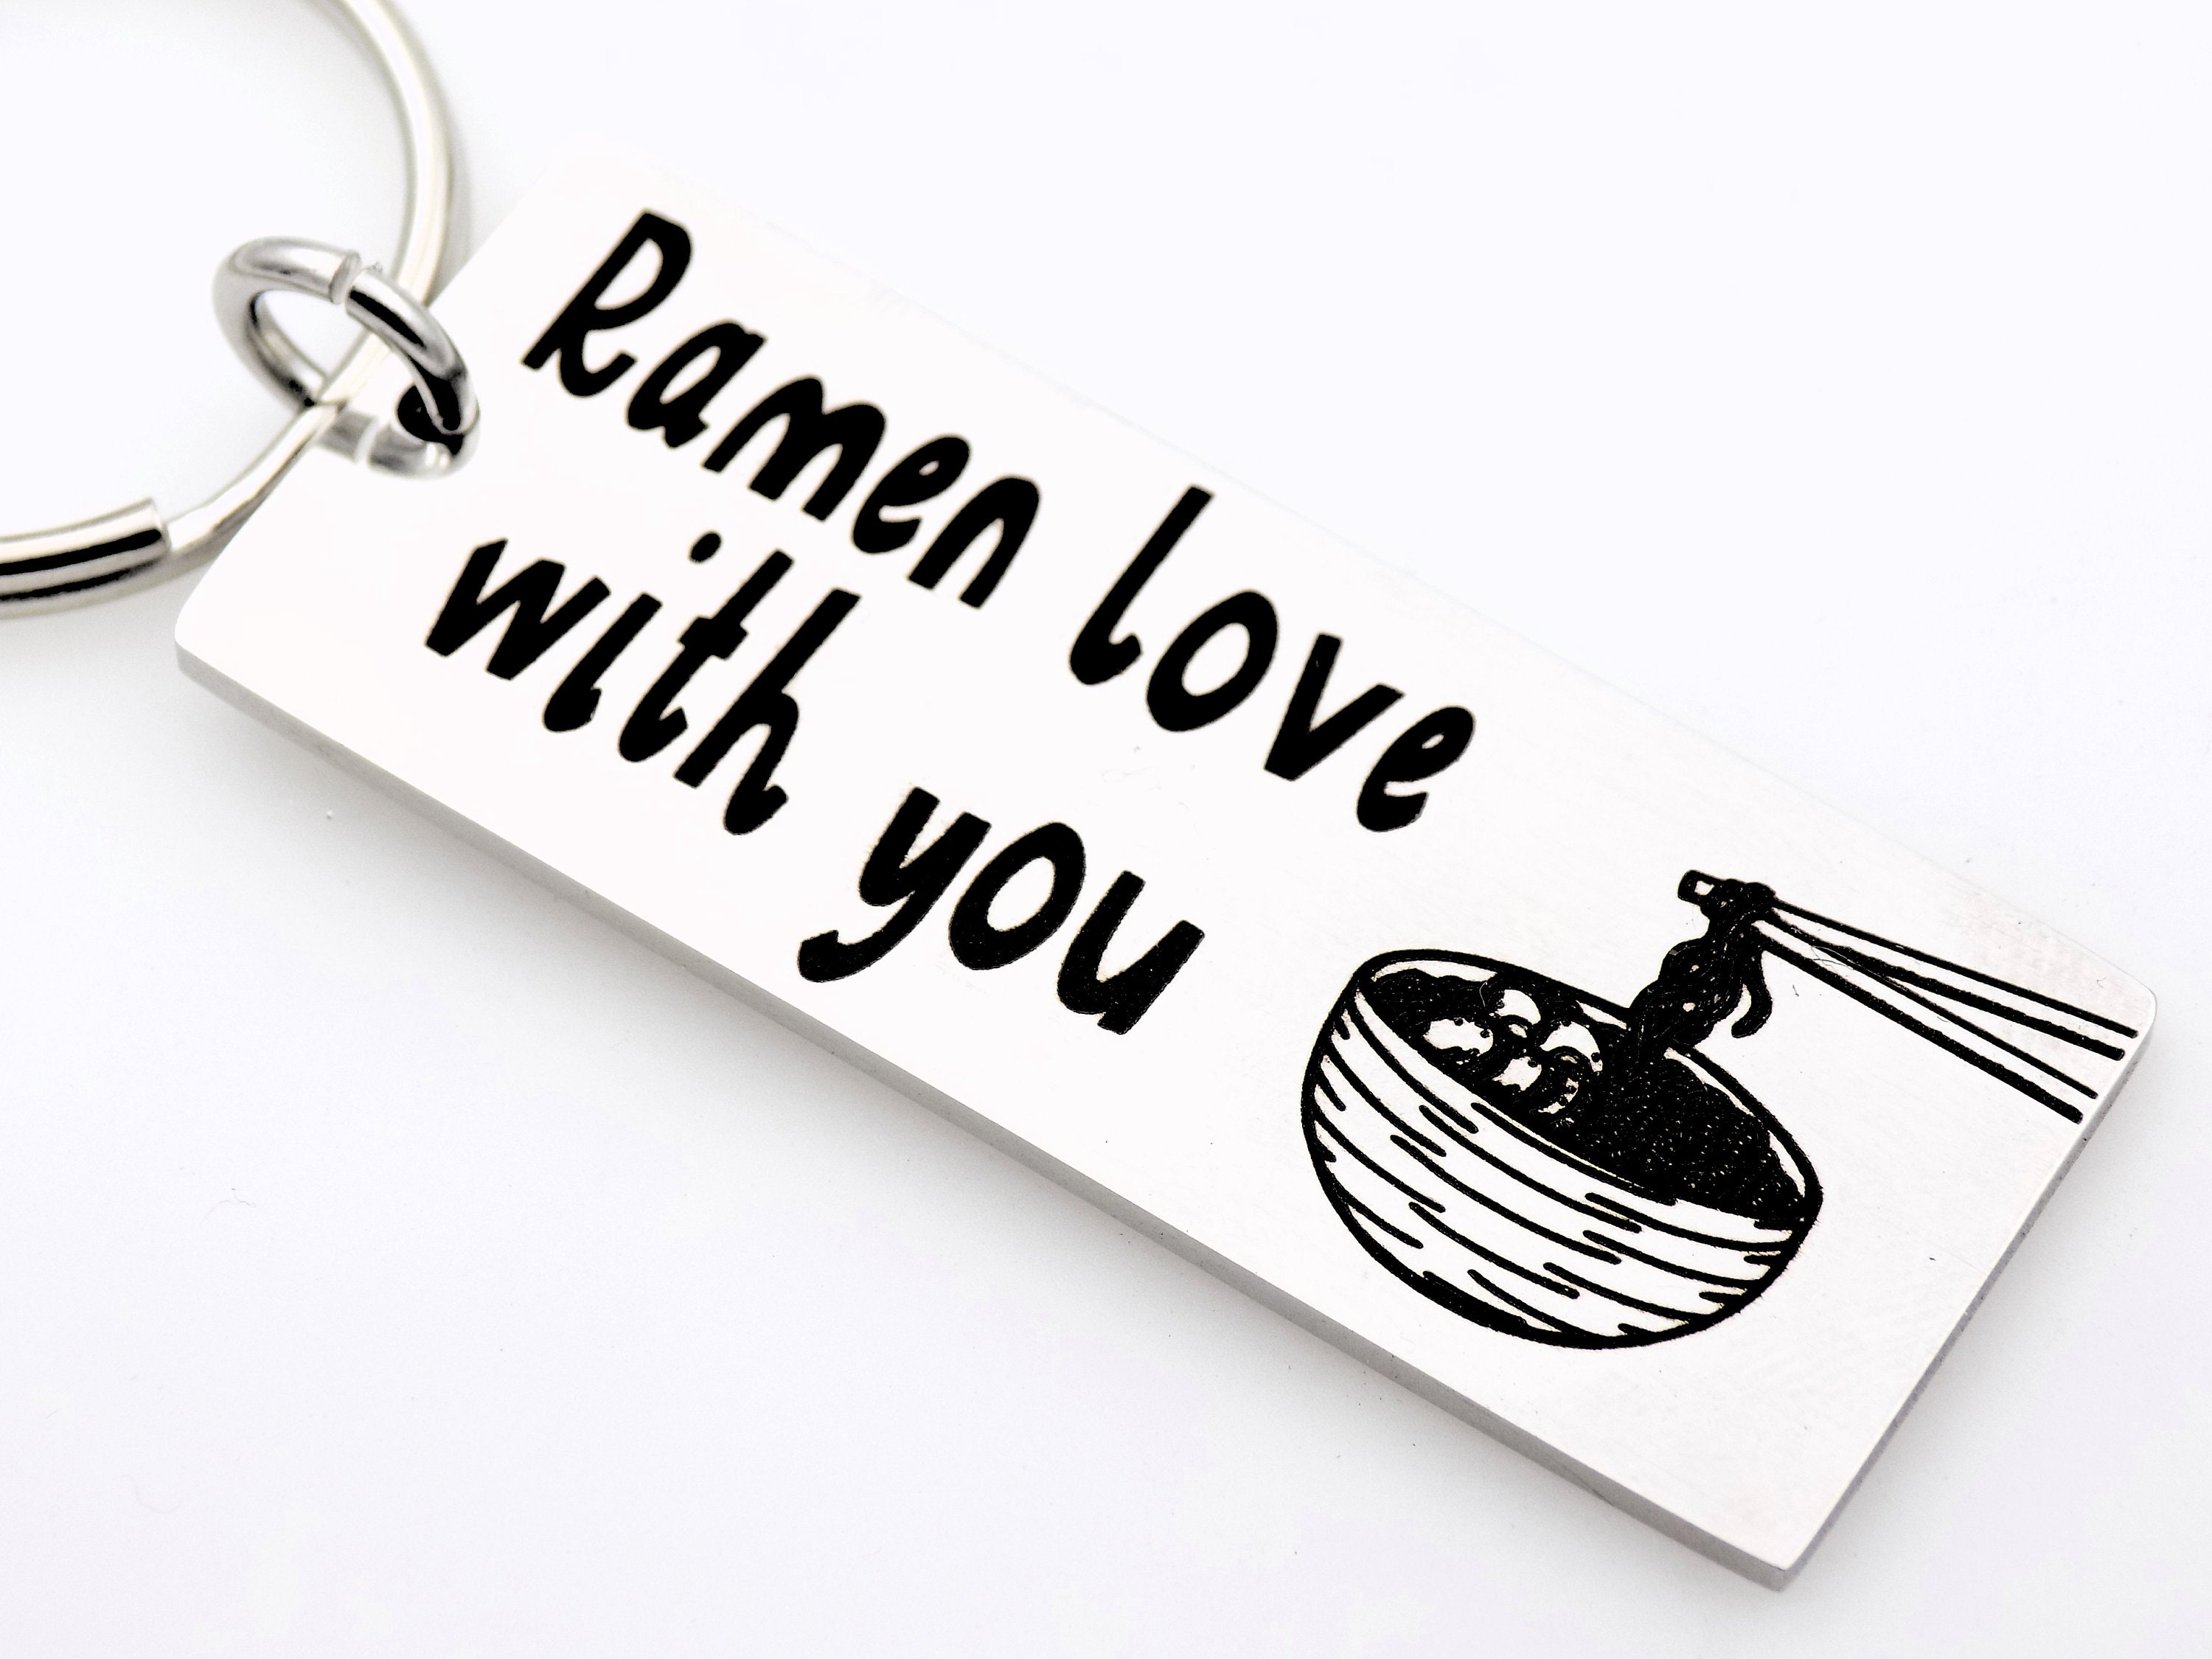 Funny Valentine's Day Gift For Him Or Her, Ramen Pho Miso Noodles Food Themed Anniversary Pun